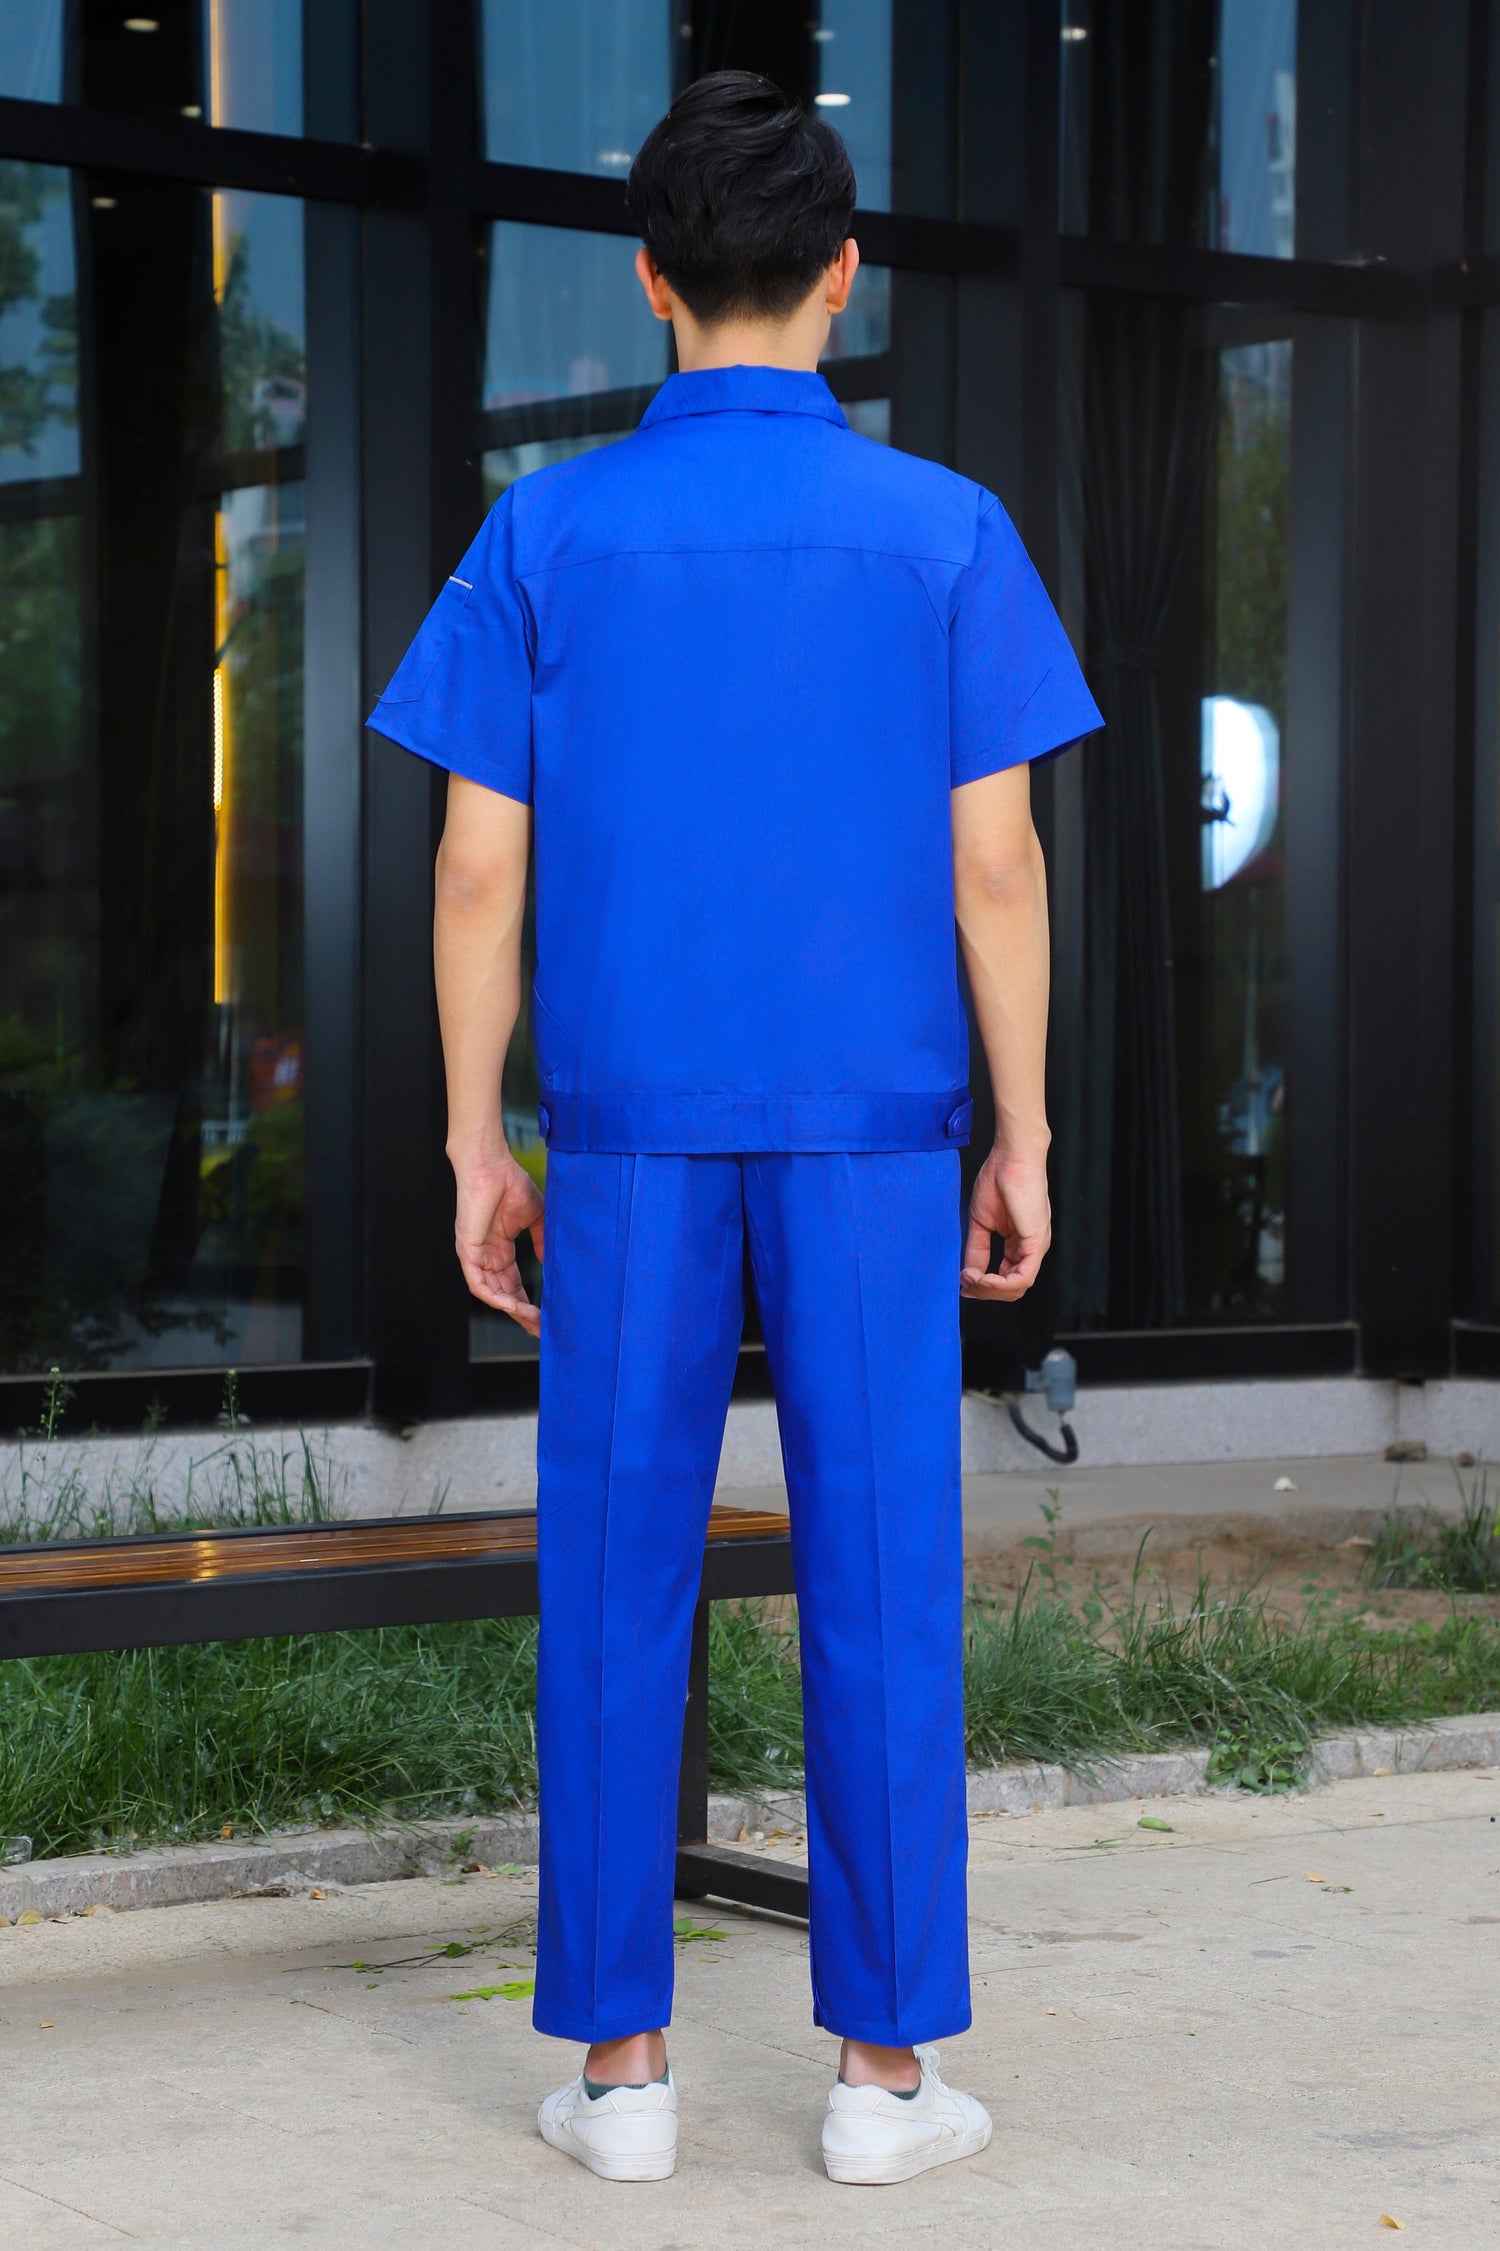 Corals Trading Co. 可樂思百貨商行 涤棉 Short-sleeved polyester cotton overalls for summer SD-S302